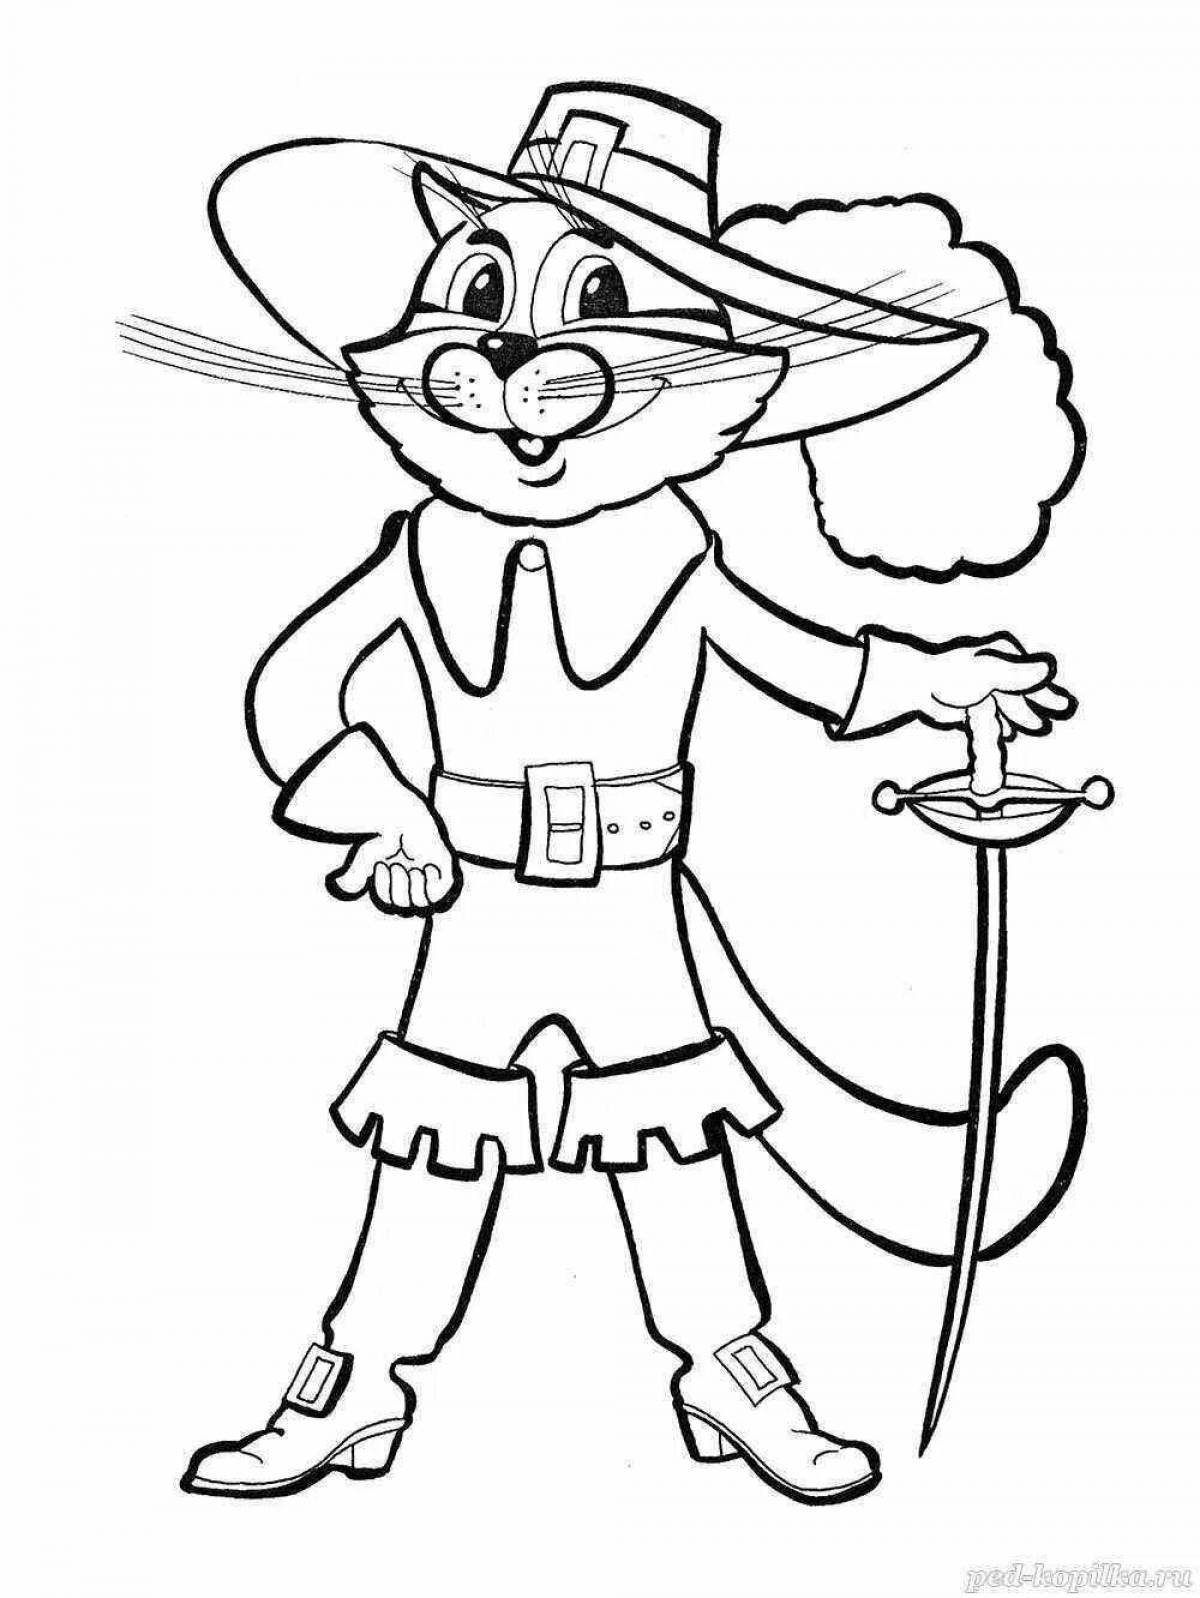 Coloring page adorable puss in boots